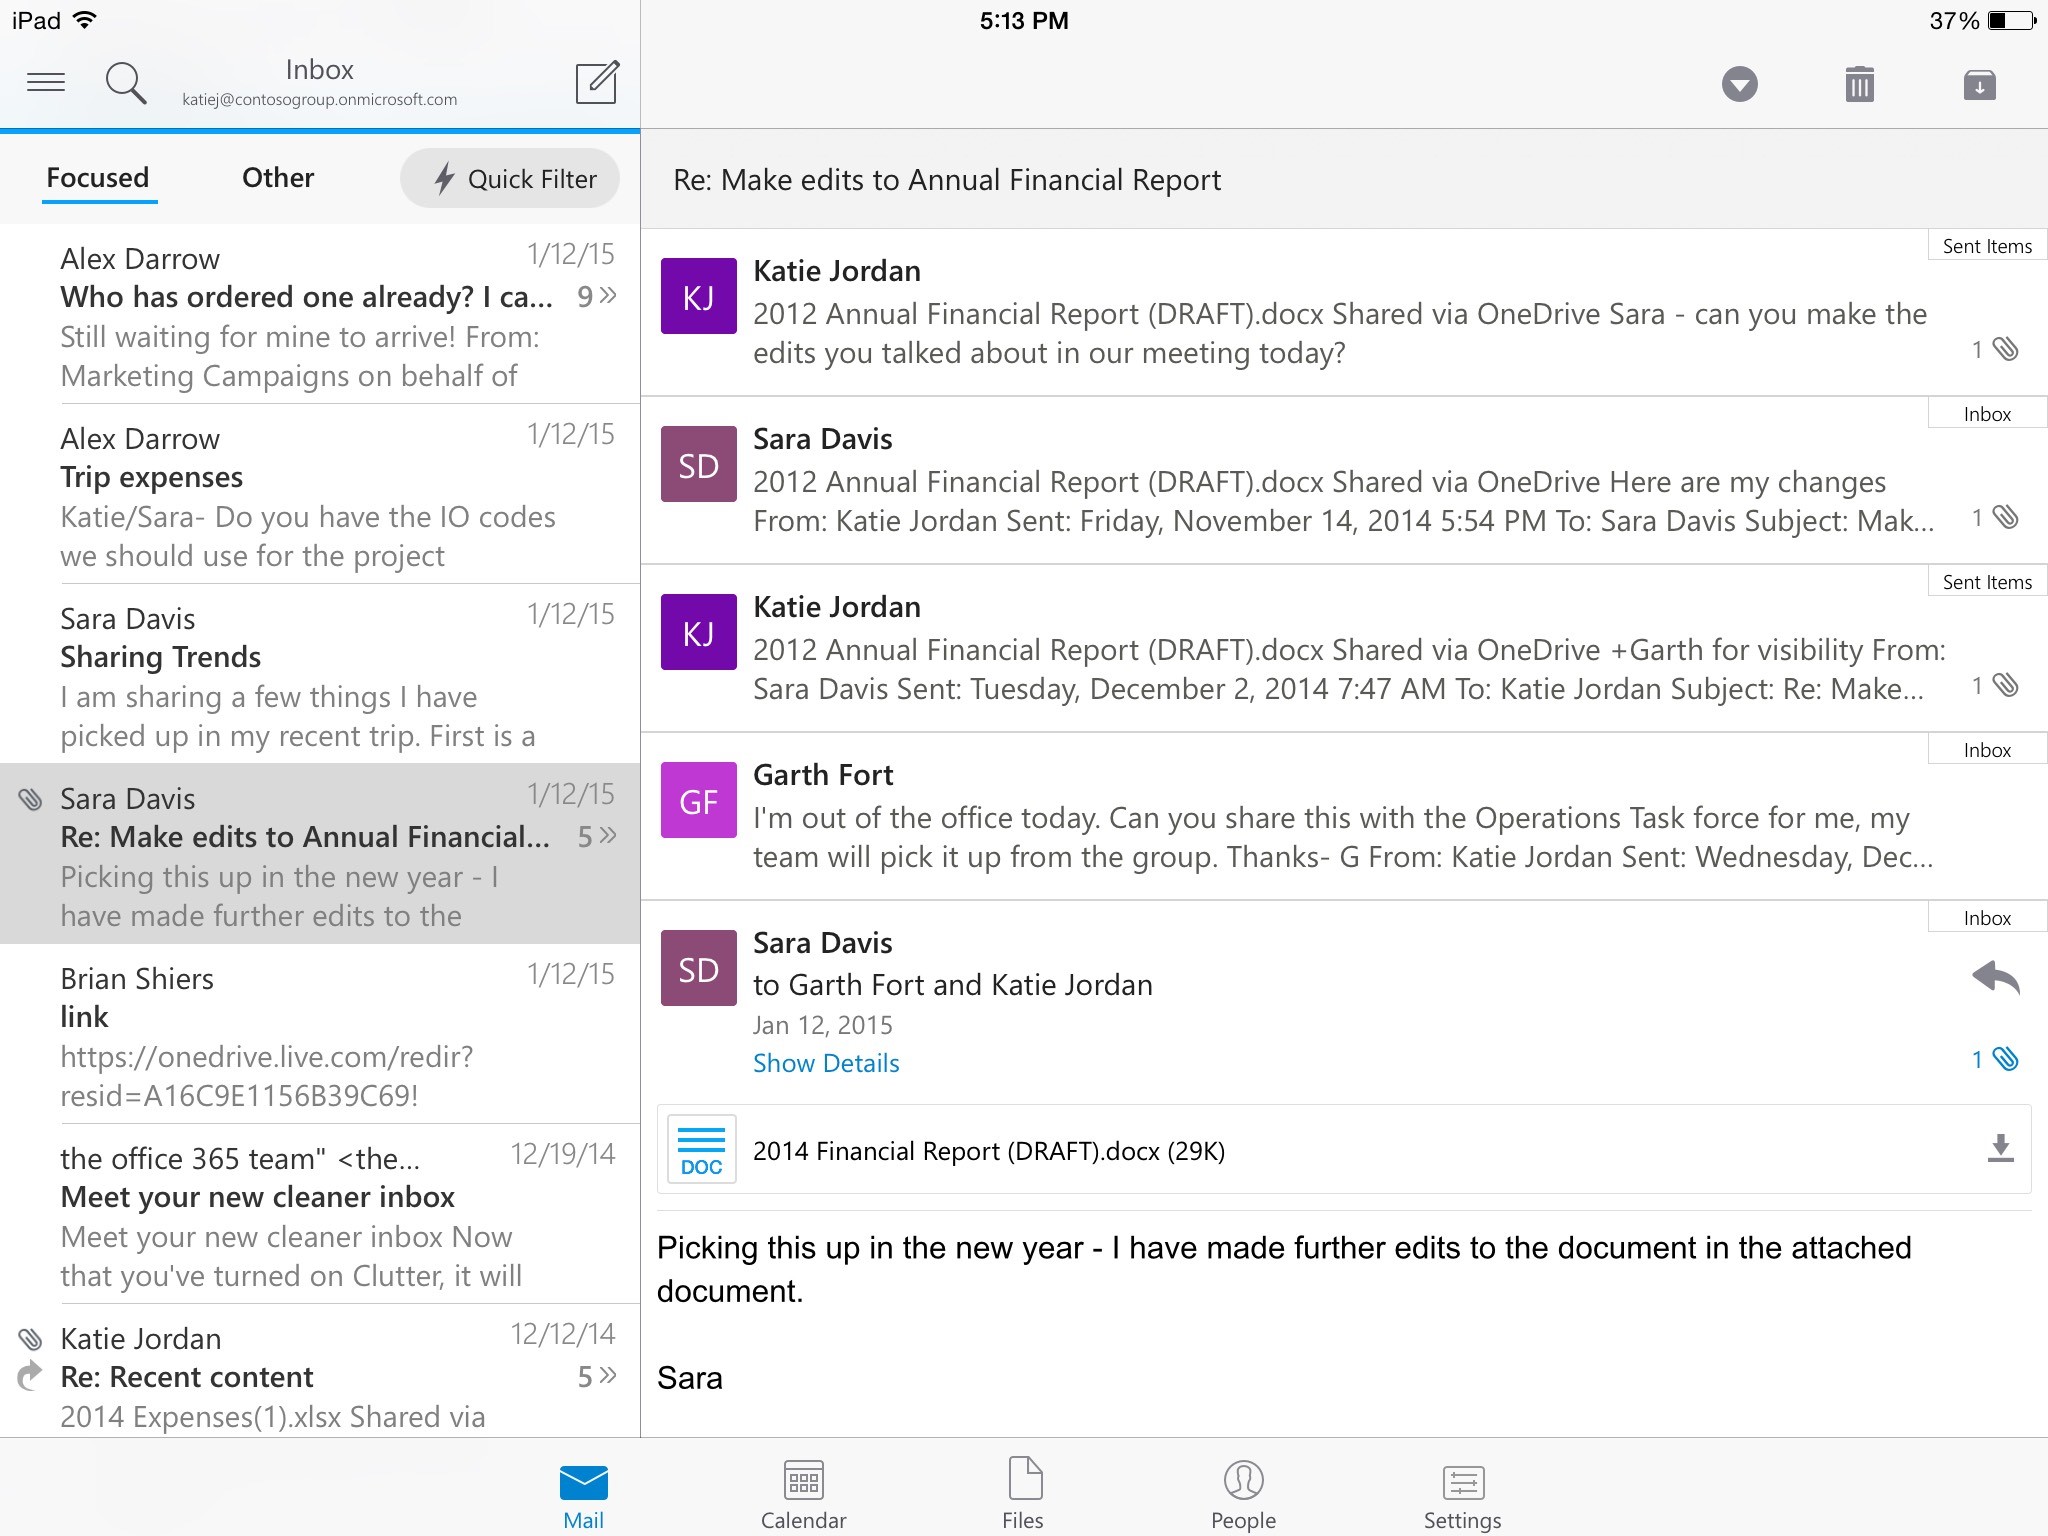 Outlook for iPad